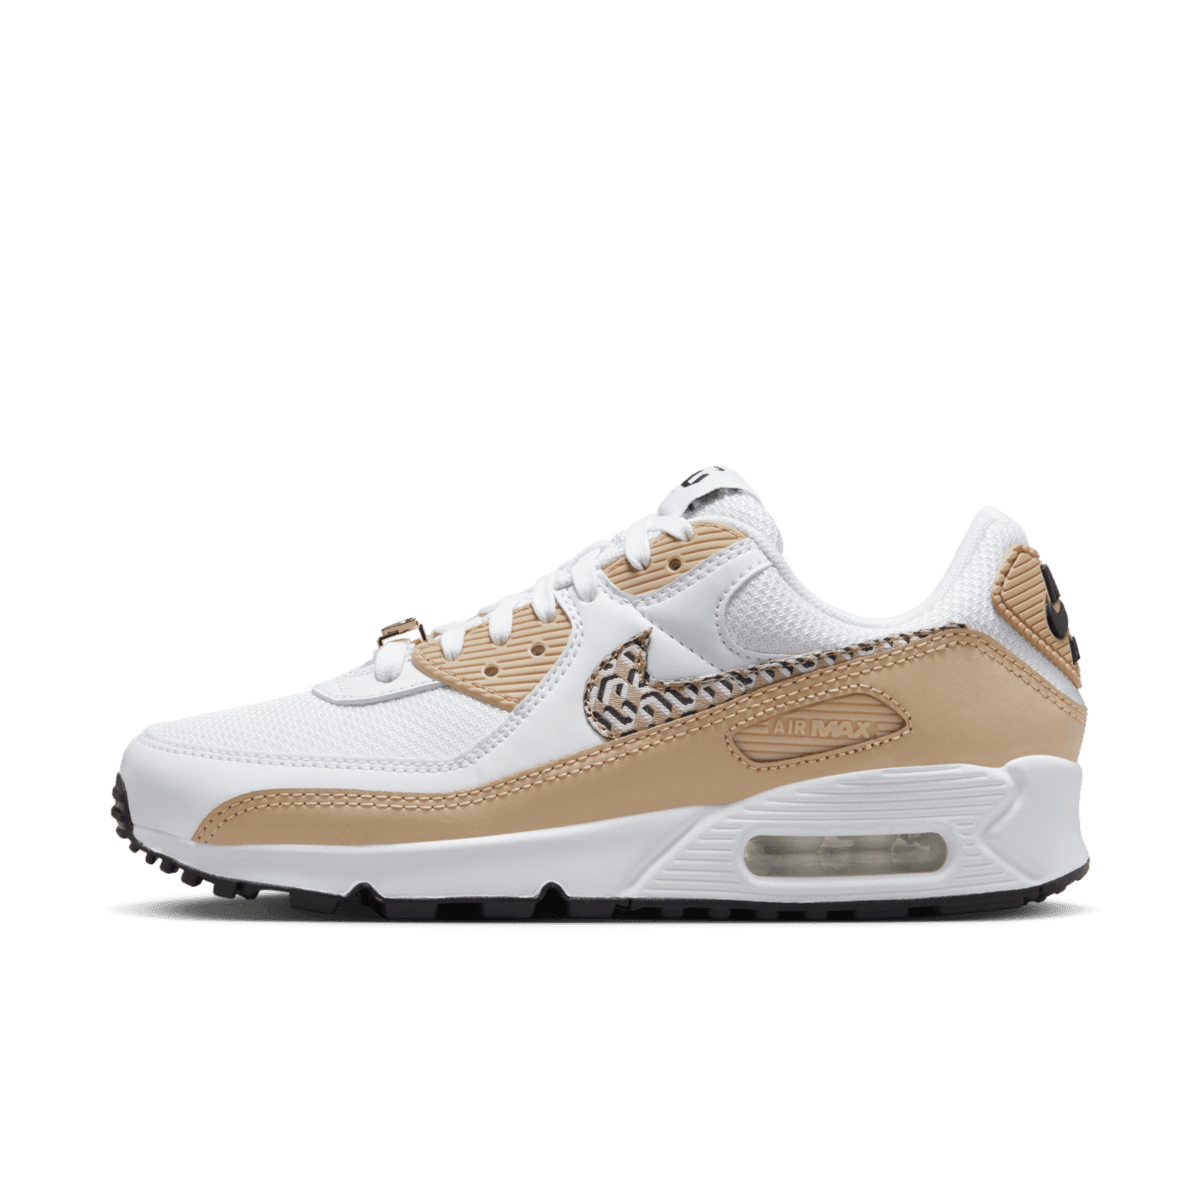 Nike Air Max 90 WMNS 'United in Victory'